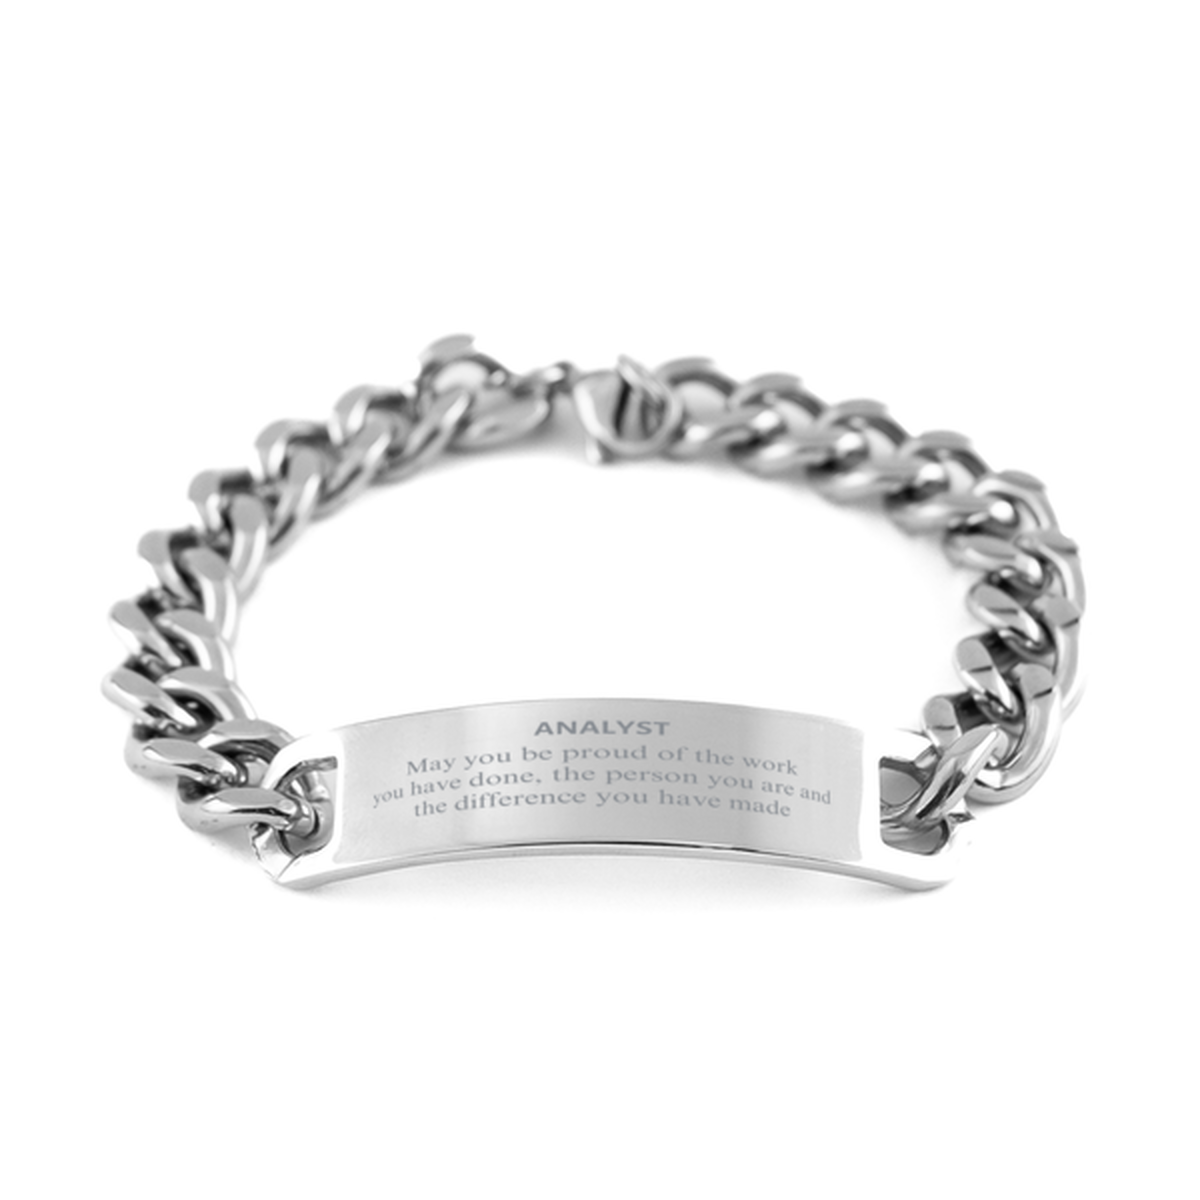 Analyst May you be proud of the work you have done, Retirement Analyst Cuban Chain Stainless Steel Bracelet for Colleague Appreciation Gifts Amazing for Analyst